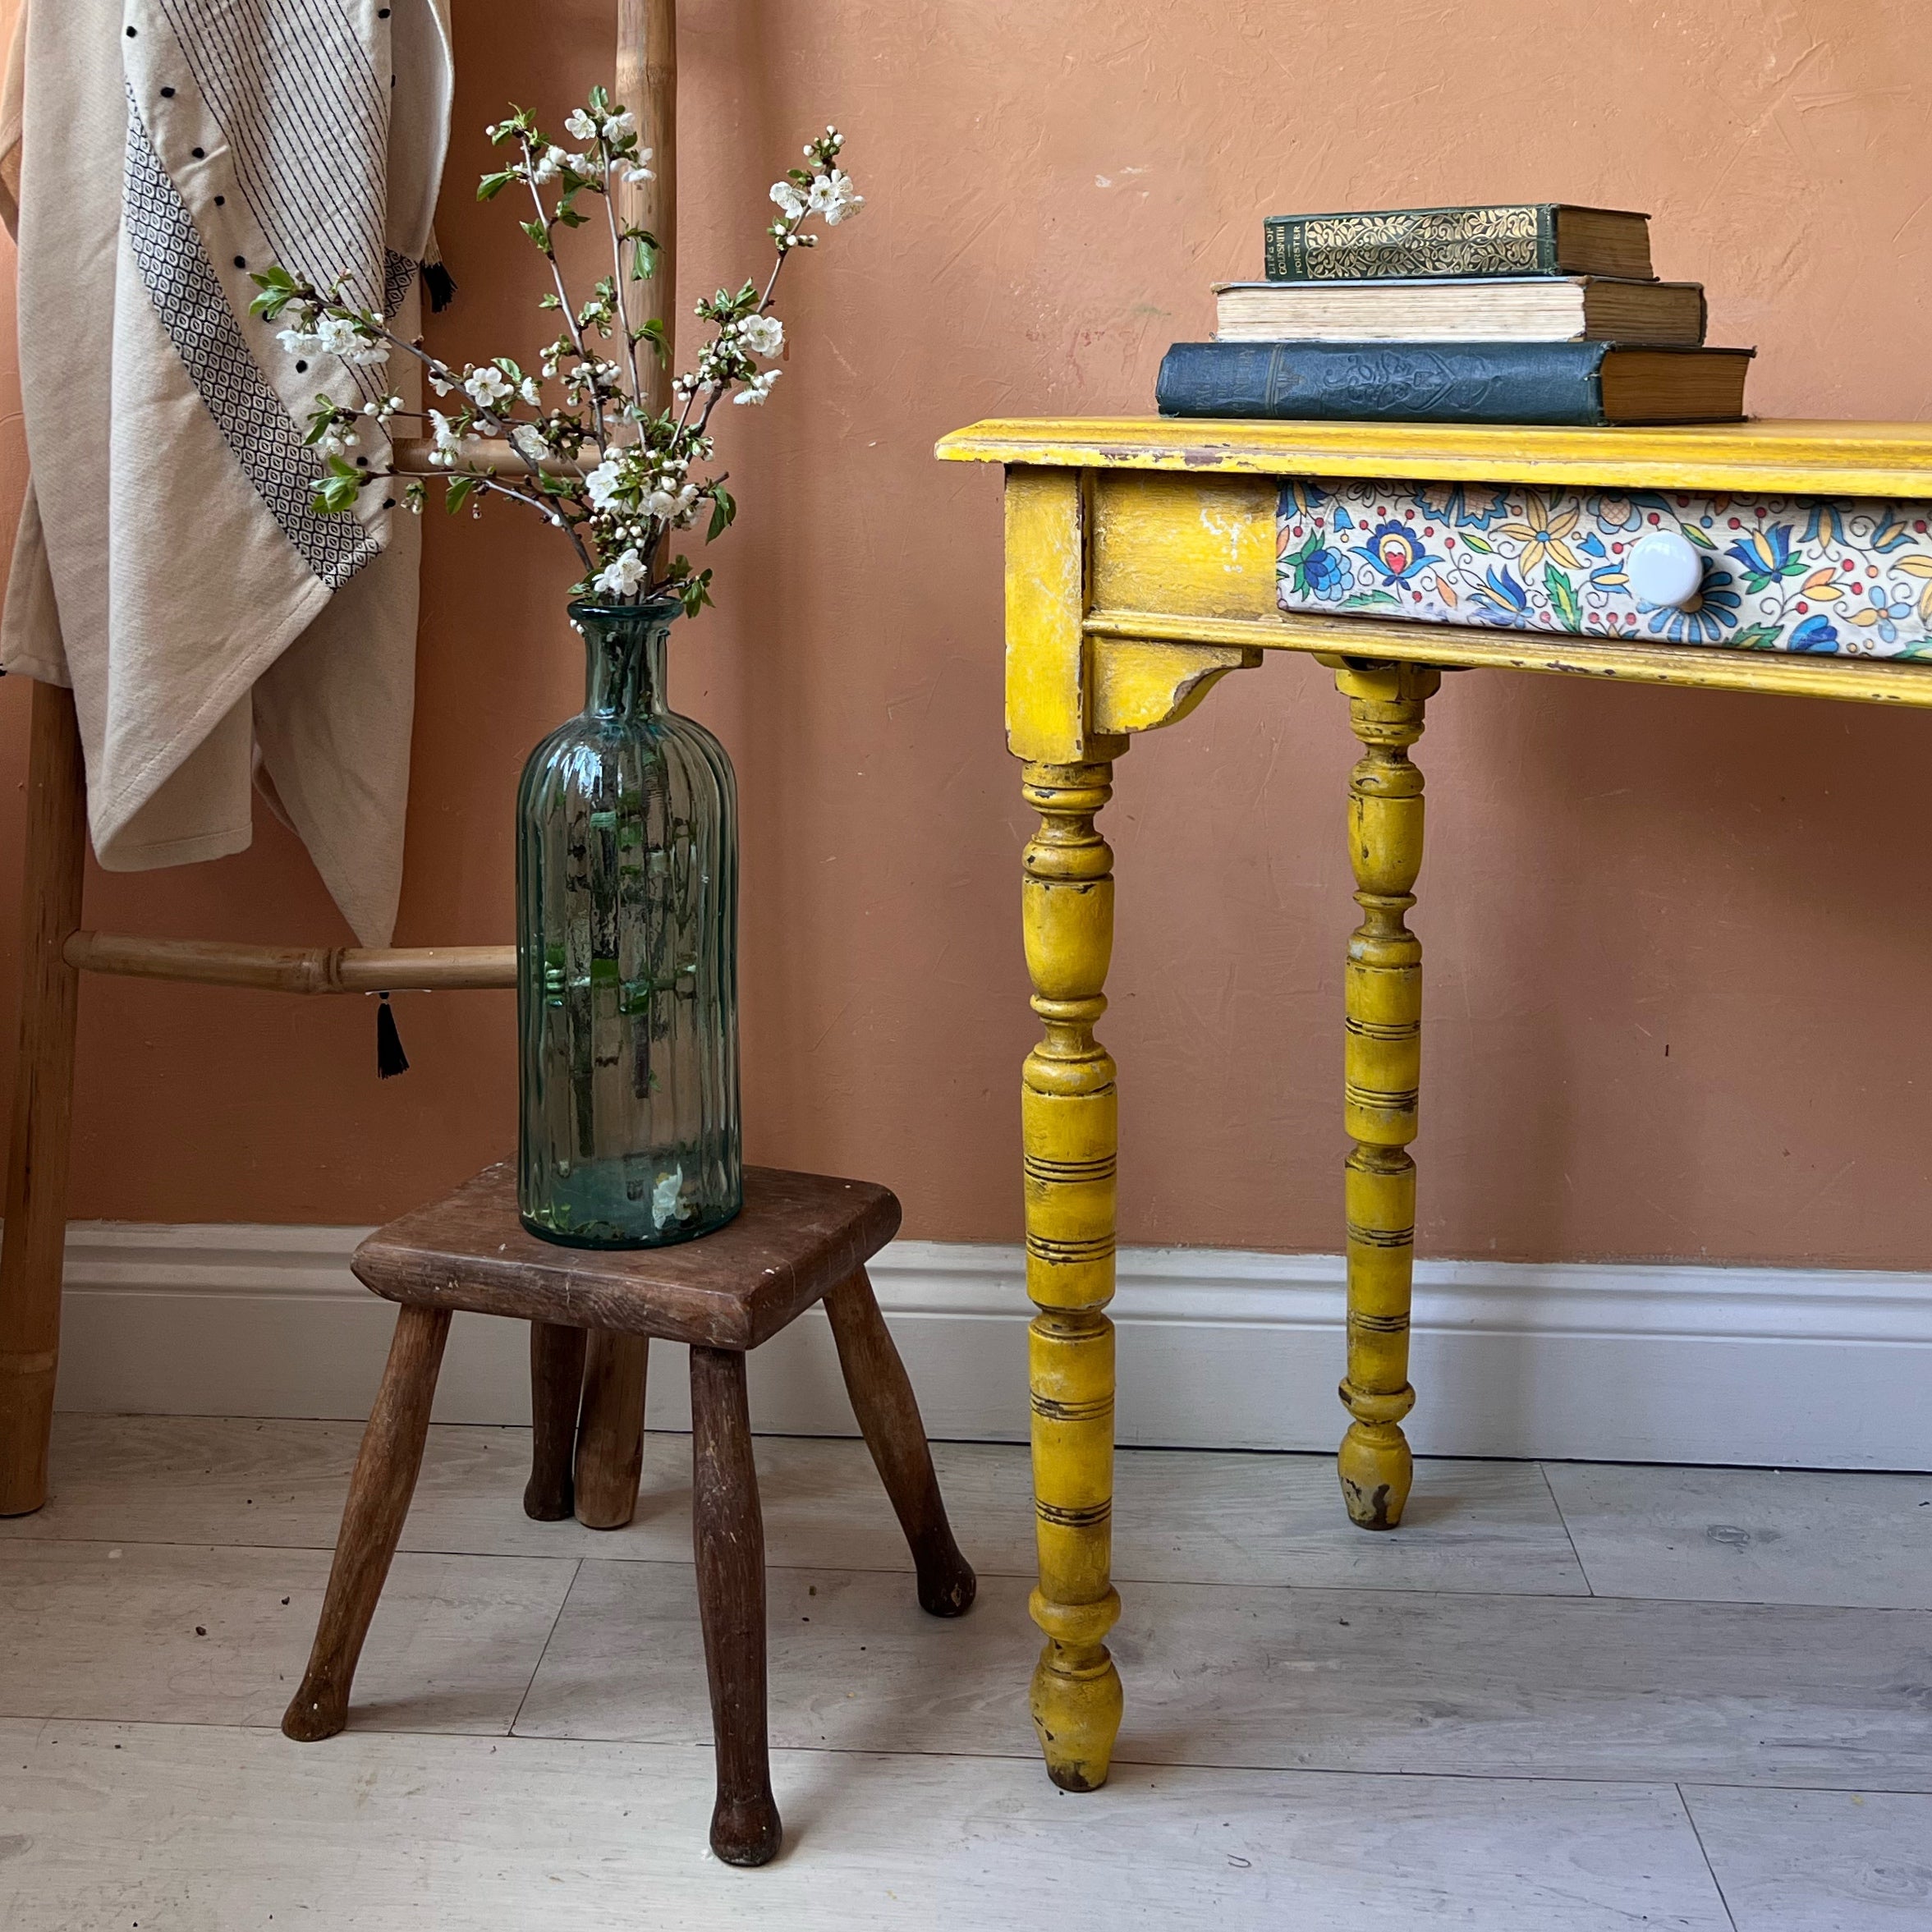 Rustic yellow console table with folk art detail